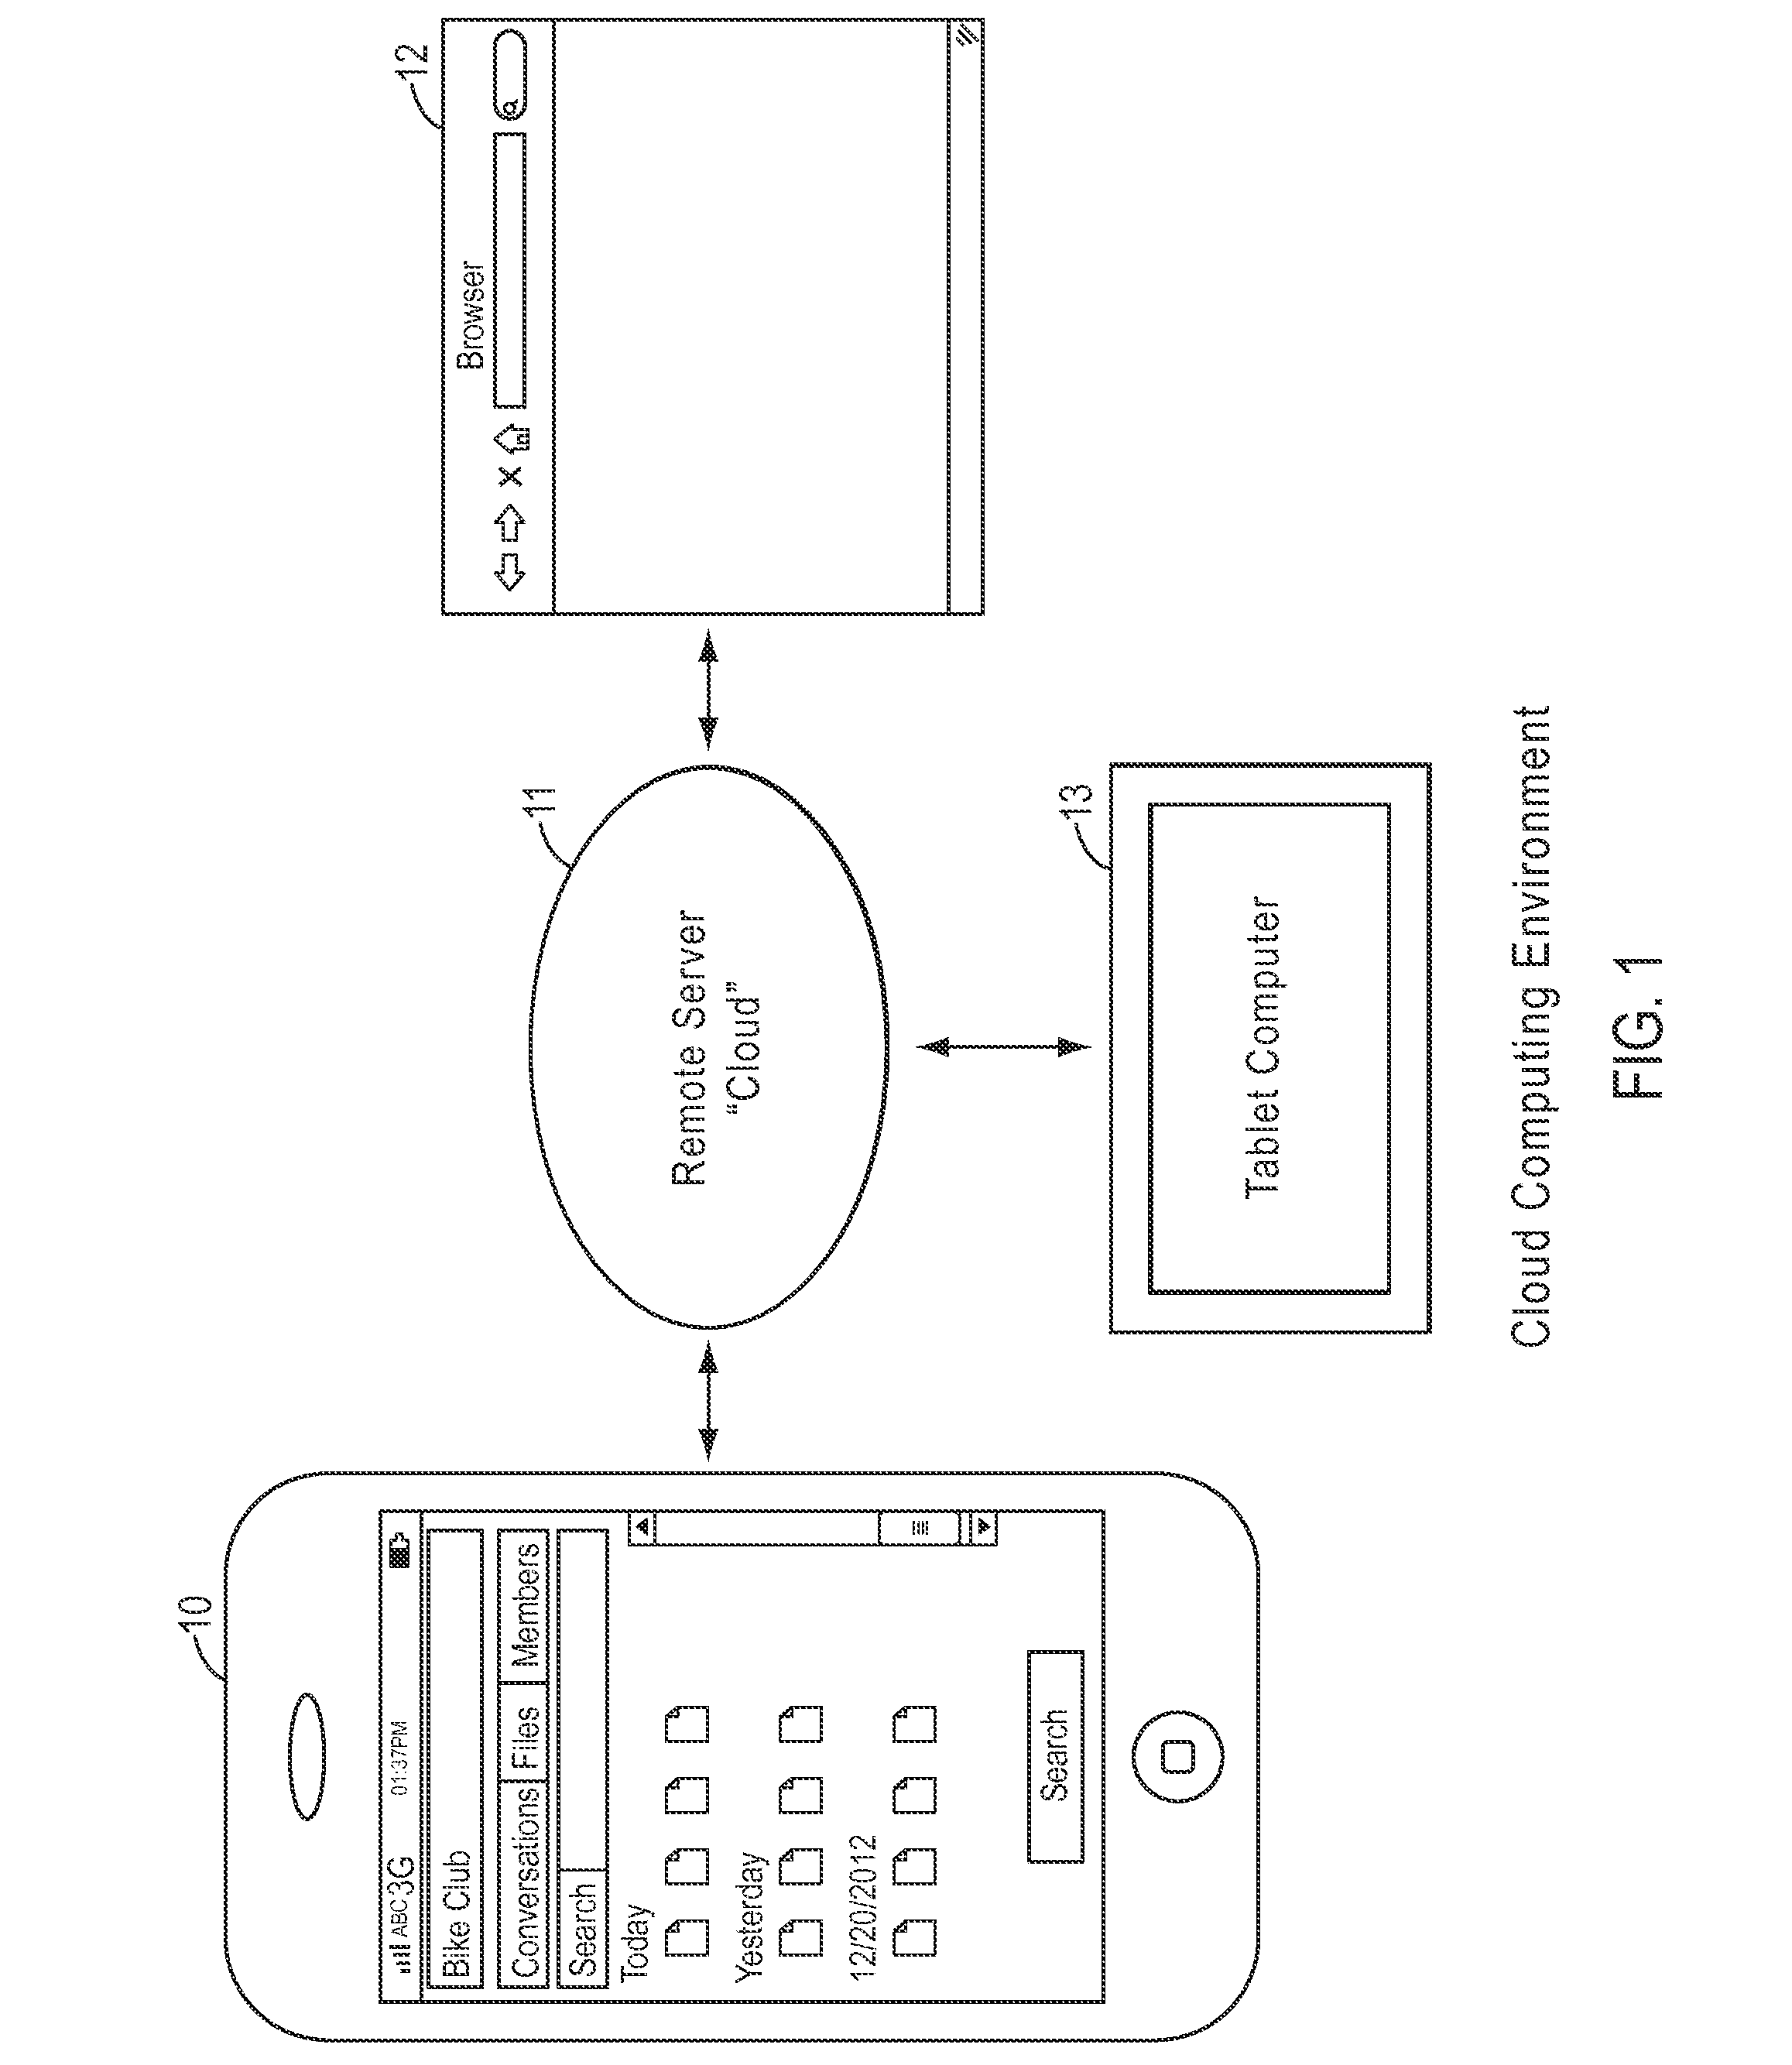 Online Systems and Methods for Advancing Information Organization Sharing and Collective Action